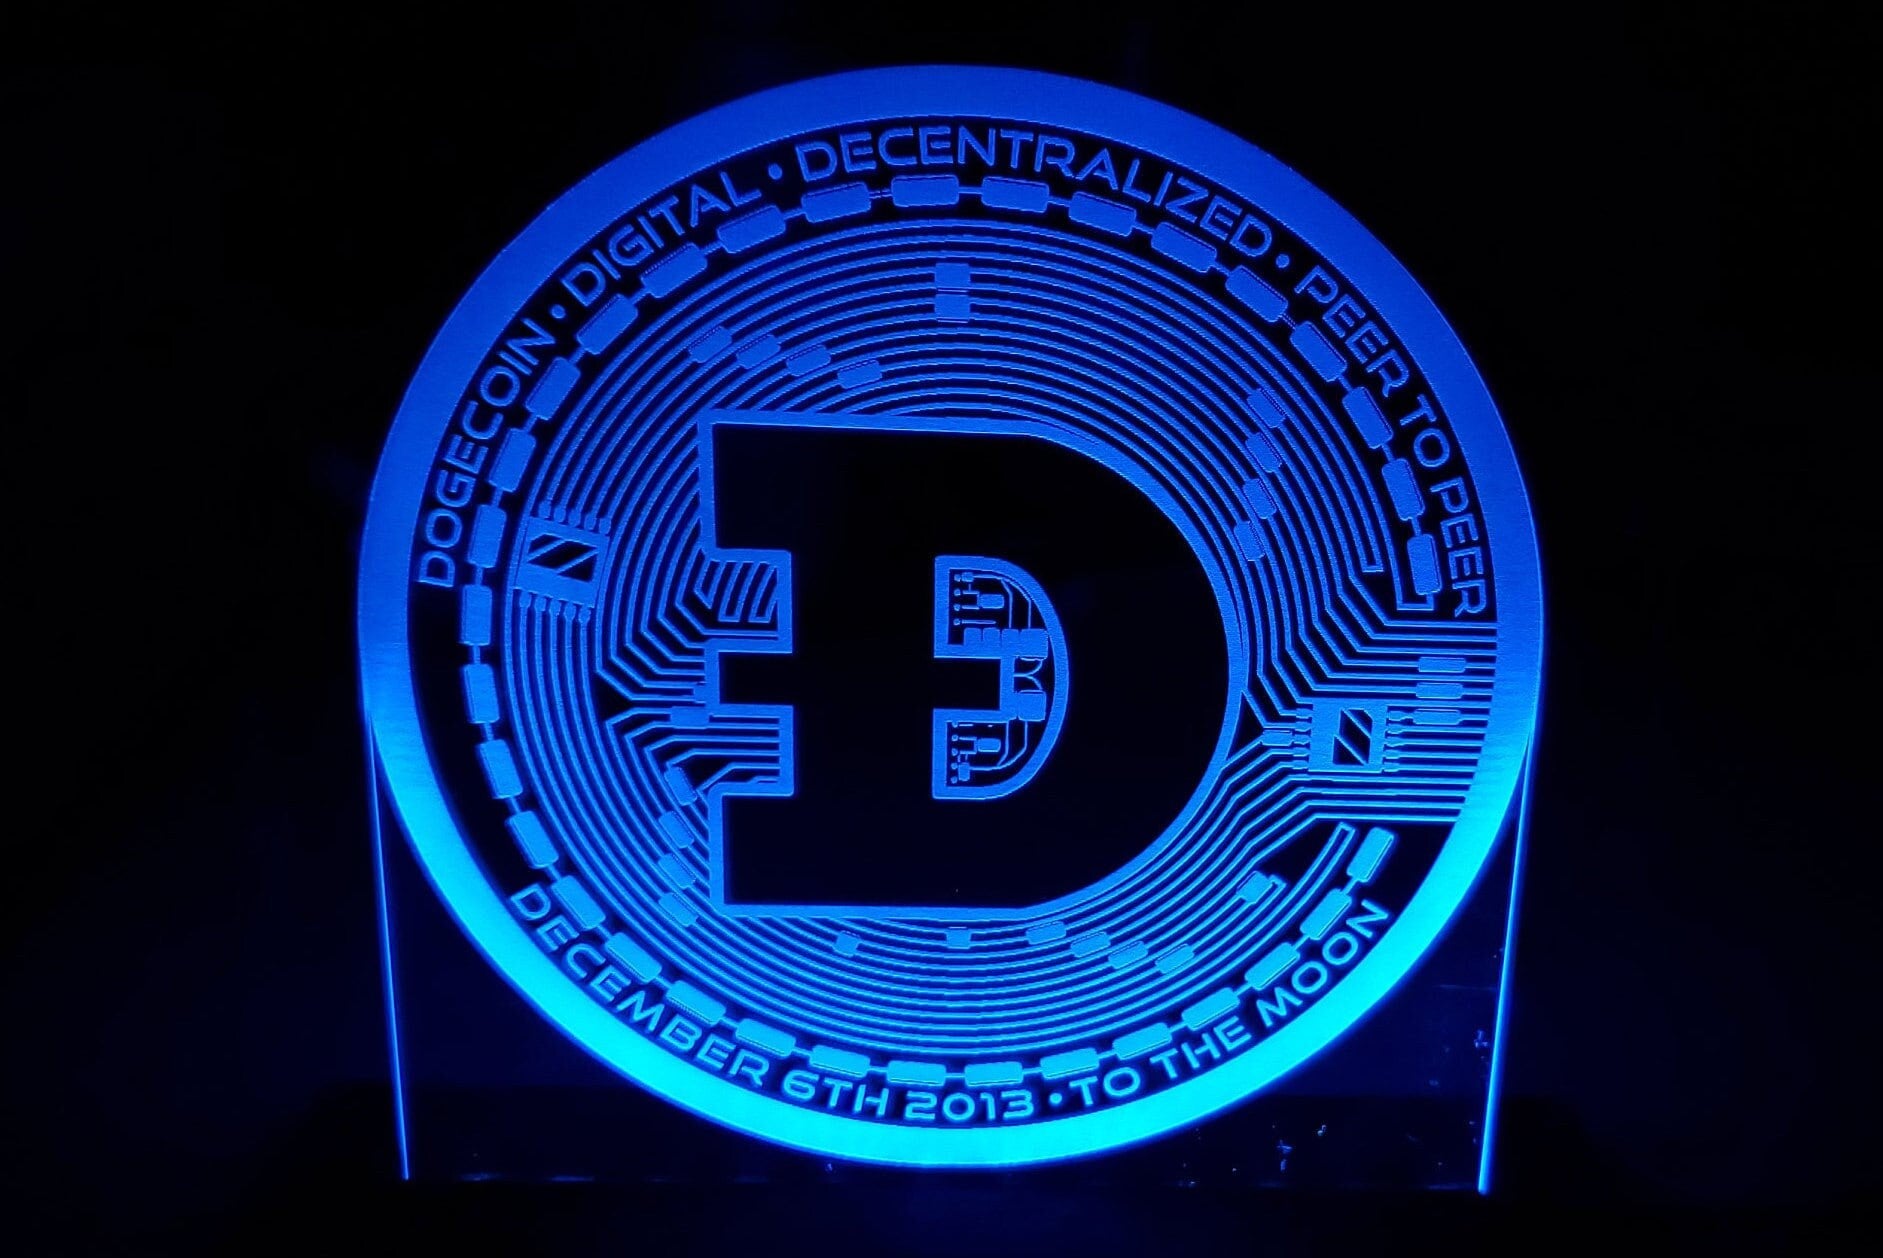 DogeCoin LED light lamp/sign - Neon-like - Free shipping - Made in USA.